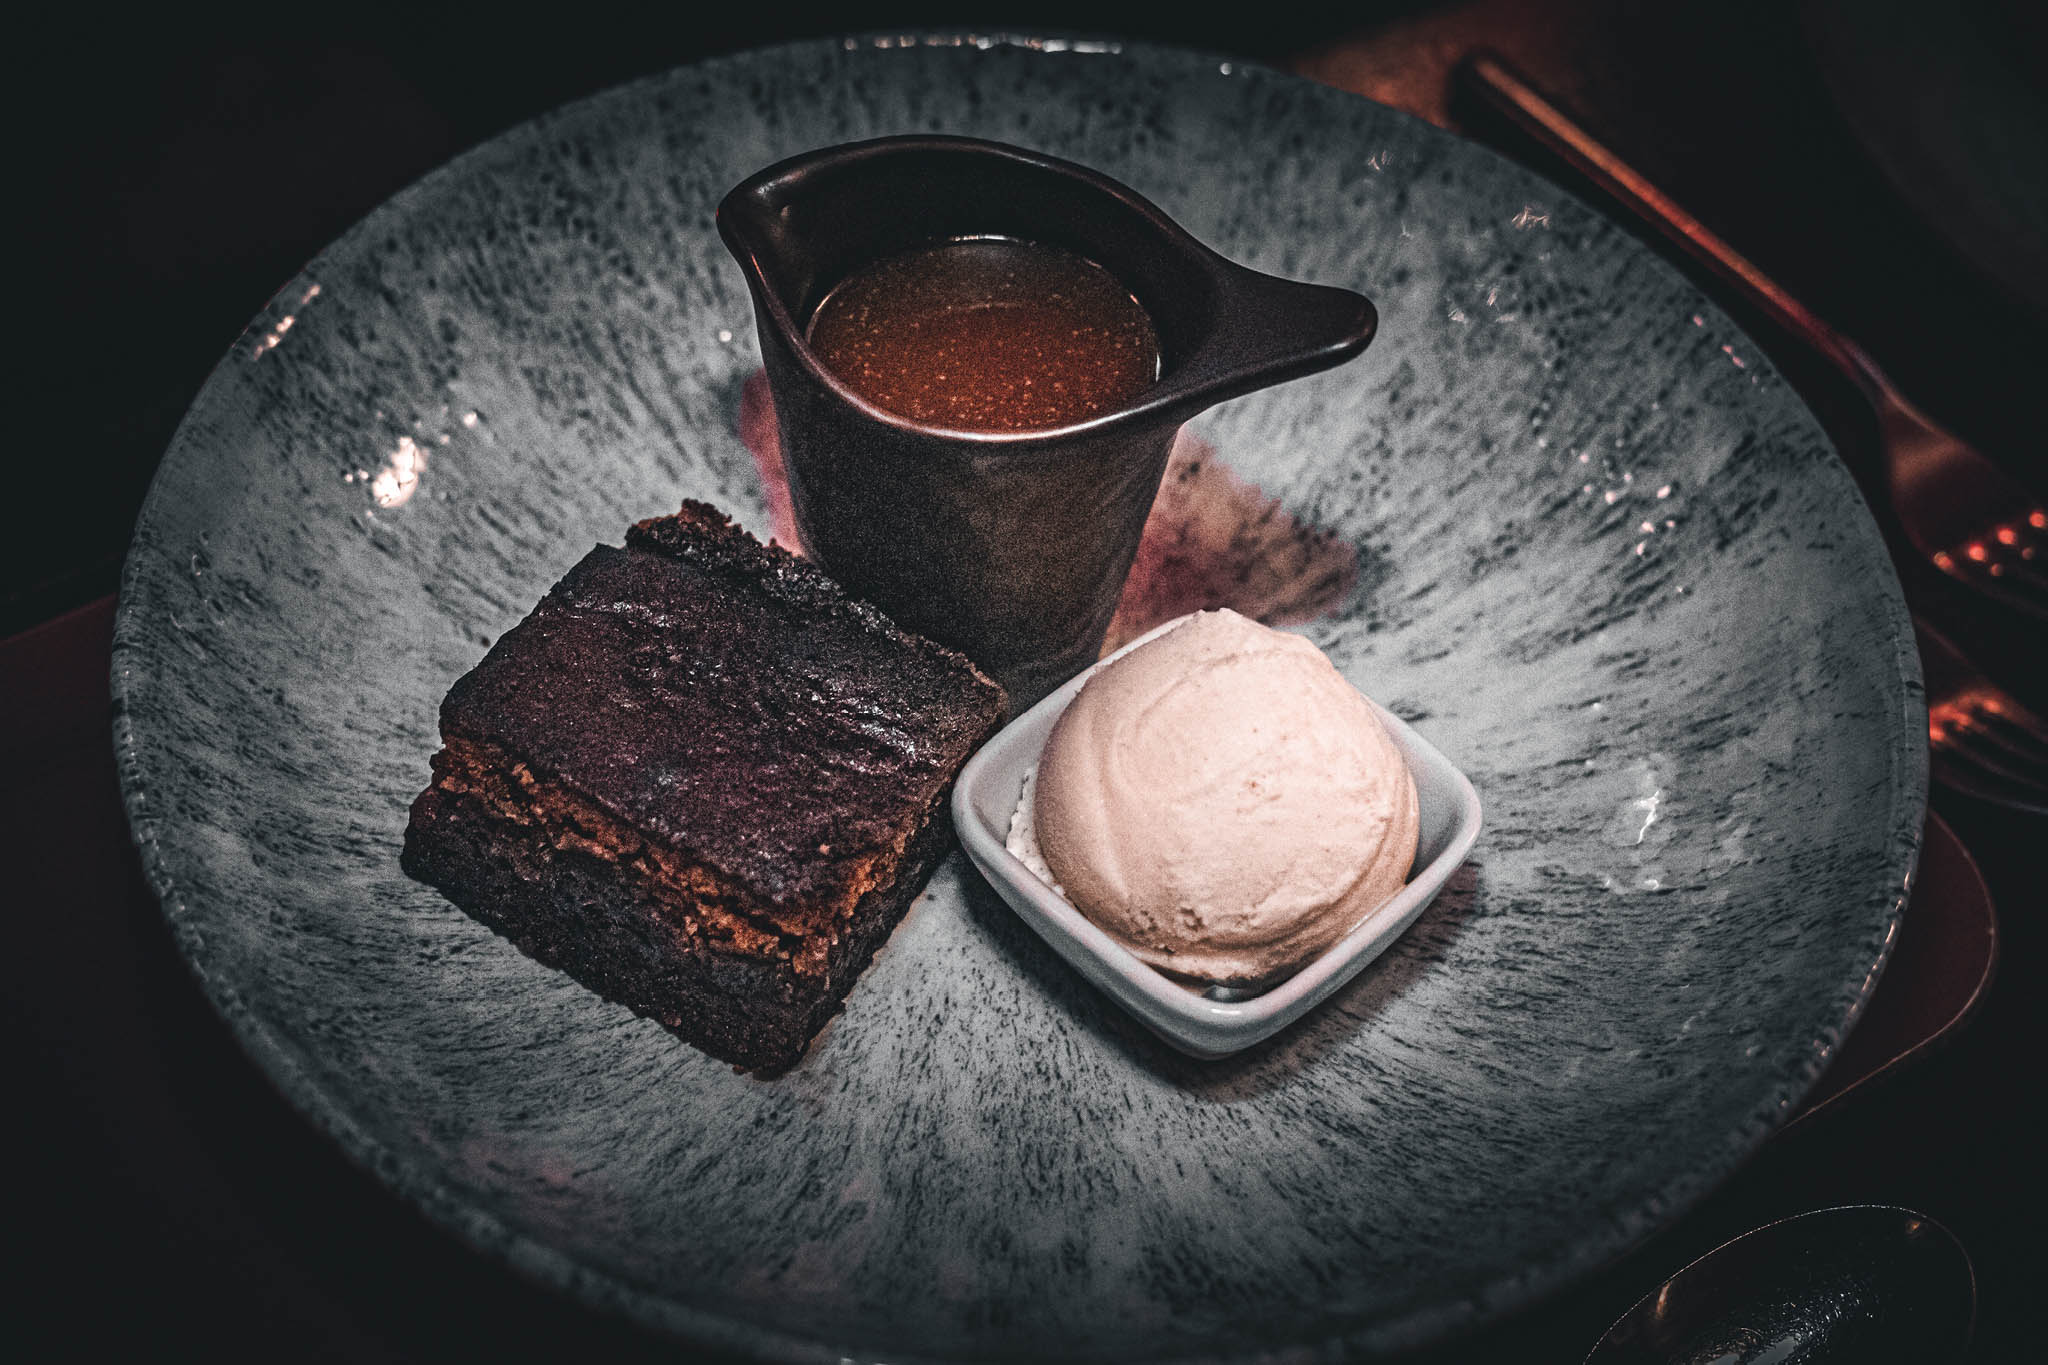 Sticky toffee pudding served with sauce ad ice cream on a blue plate